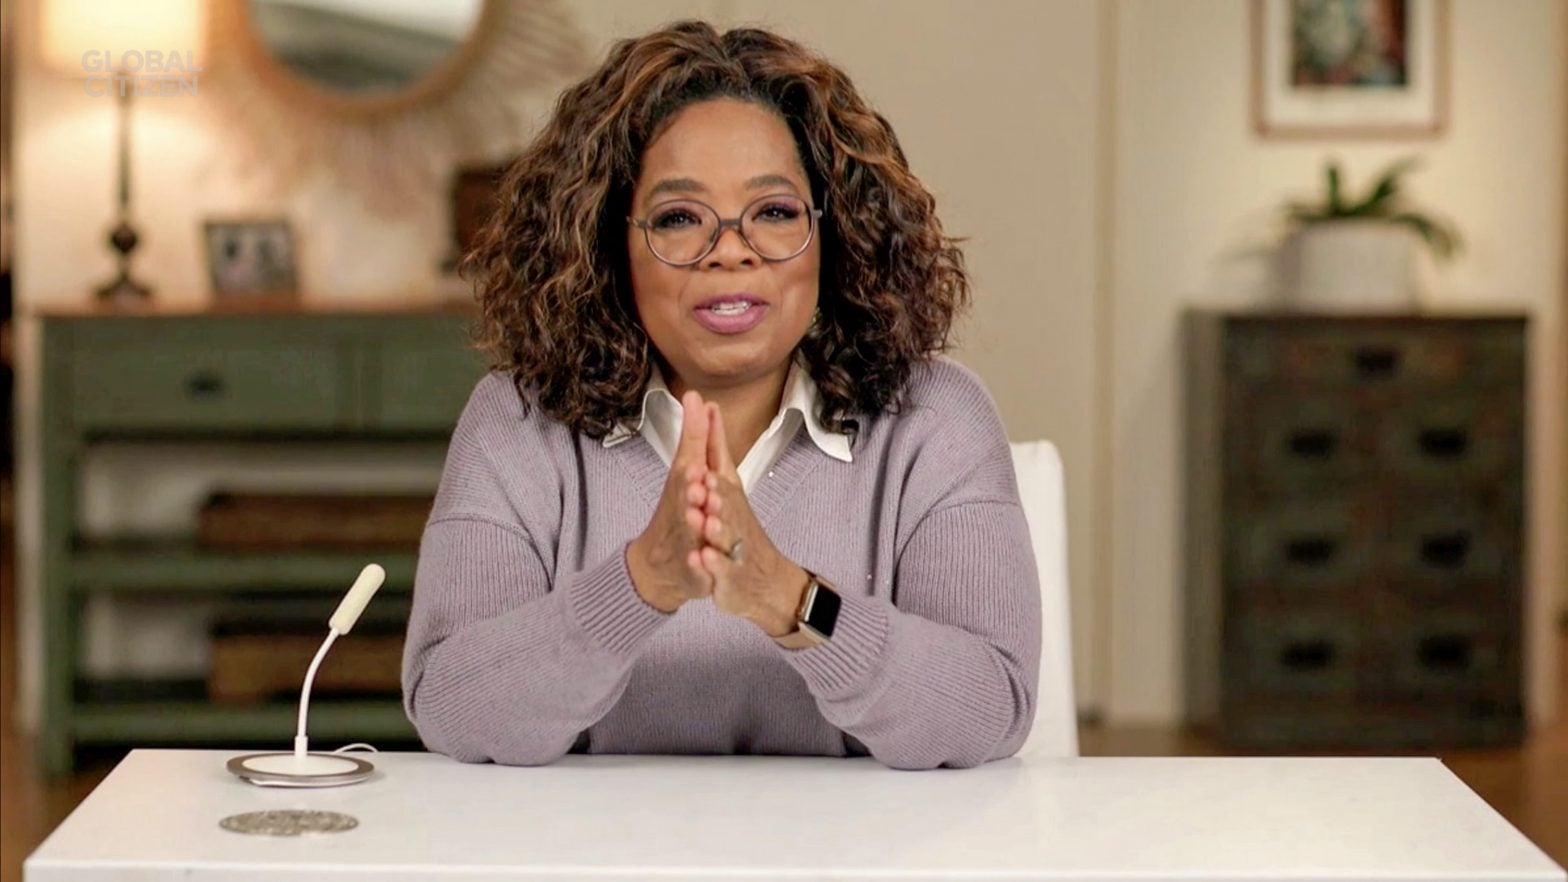 Watch Oprah and Prince Harry Open Up About Their Mental Health Journeys In New Series